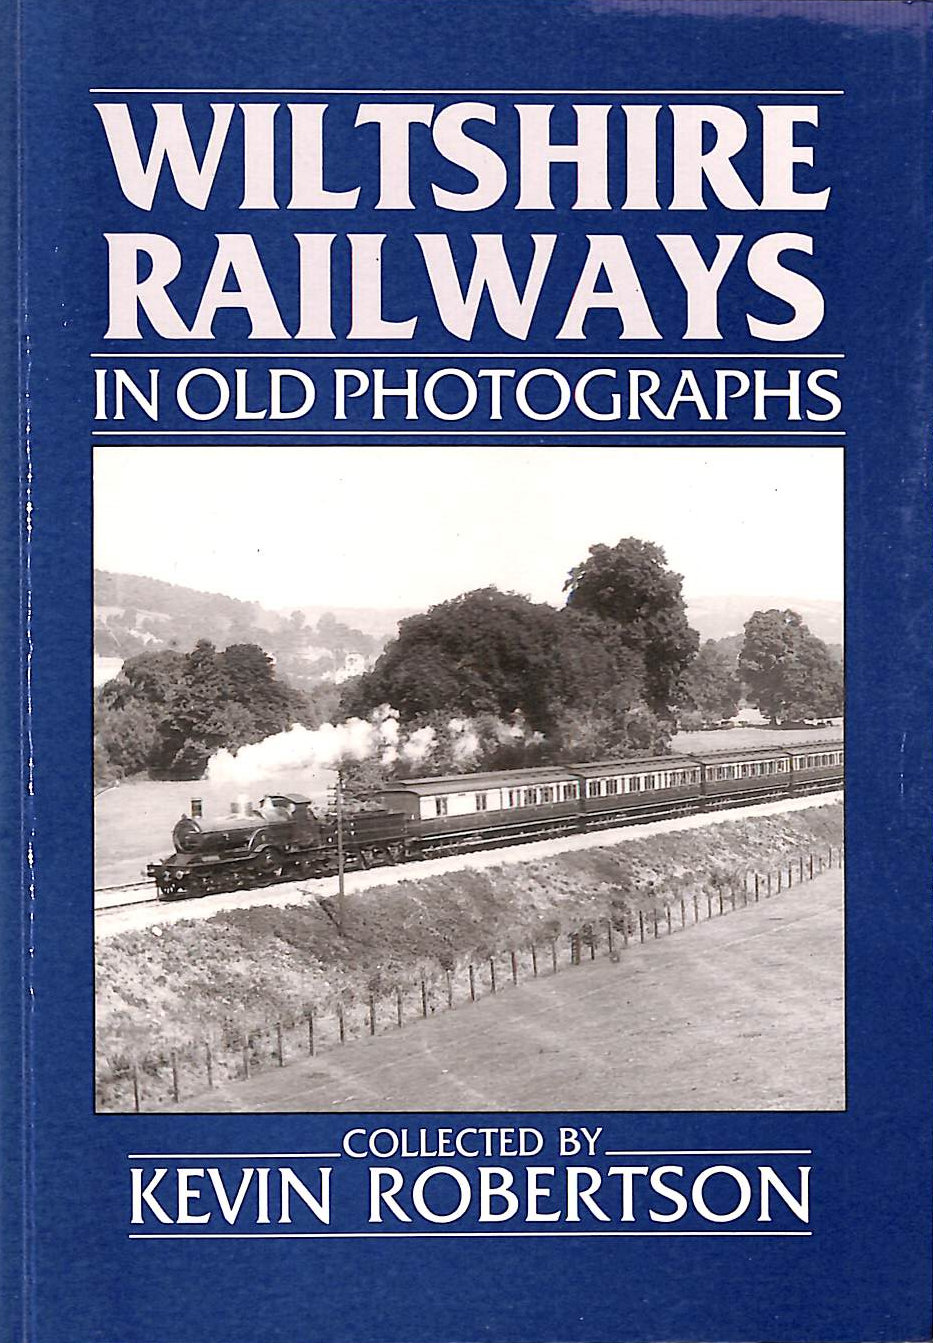 ROBERTSON, KEVIN - Wiltshire Railways in Old Photographs